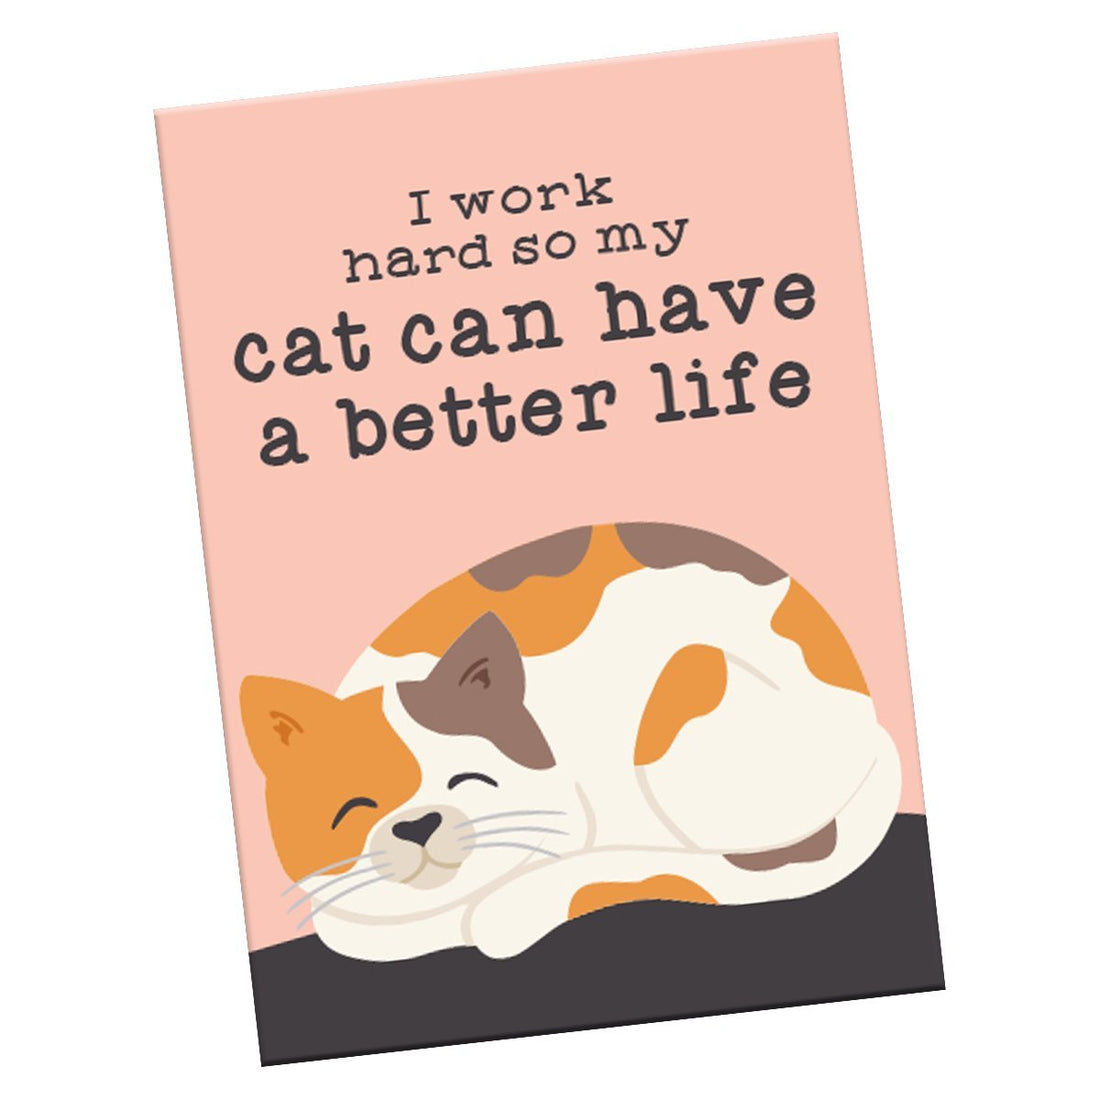 “I Work Hard So My Cat Can Have a Better Life” Magnet